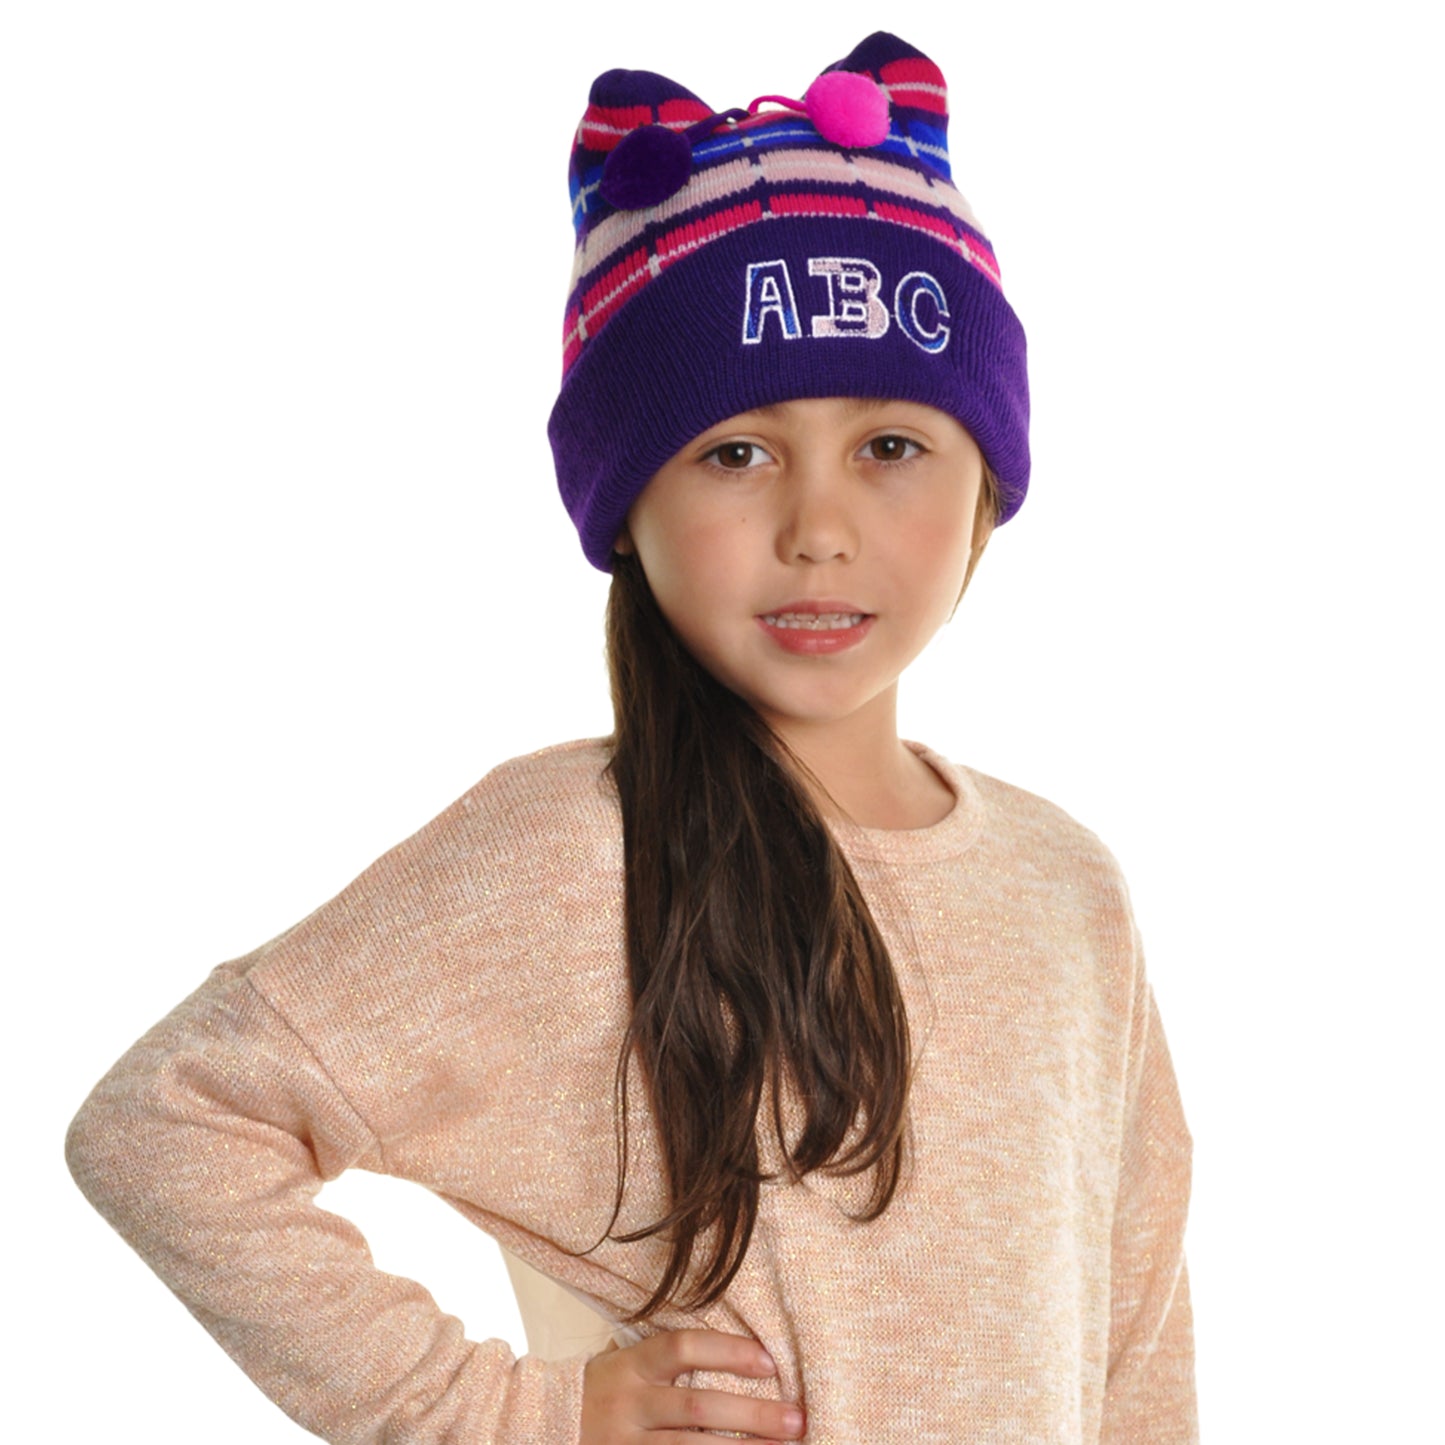 Kids Winter Warmth Knit Bear Embroidered Beanies (6-Pack)